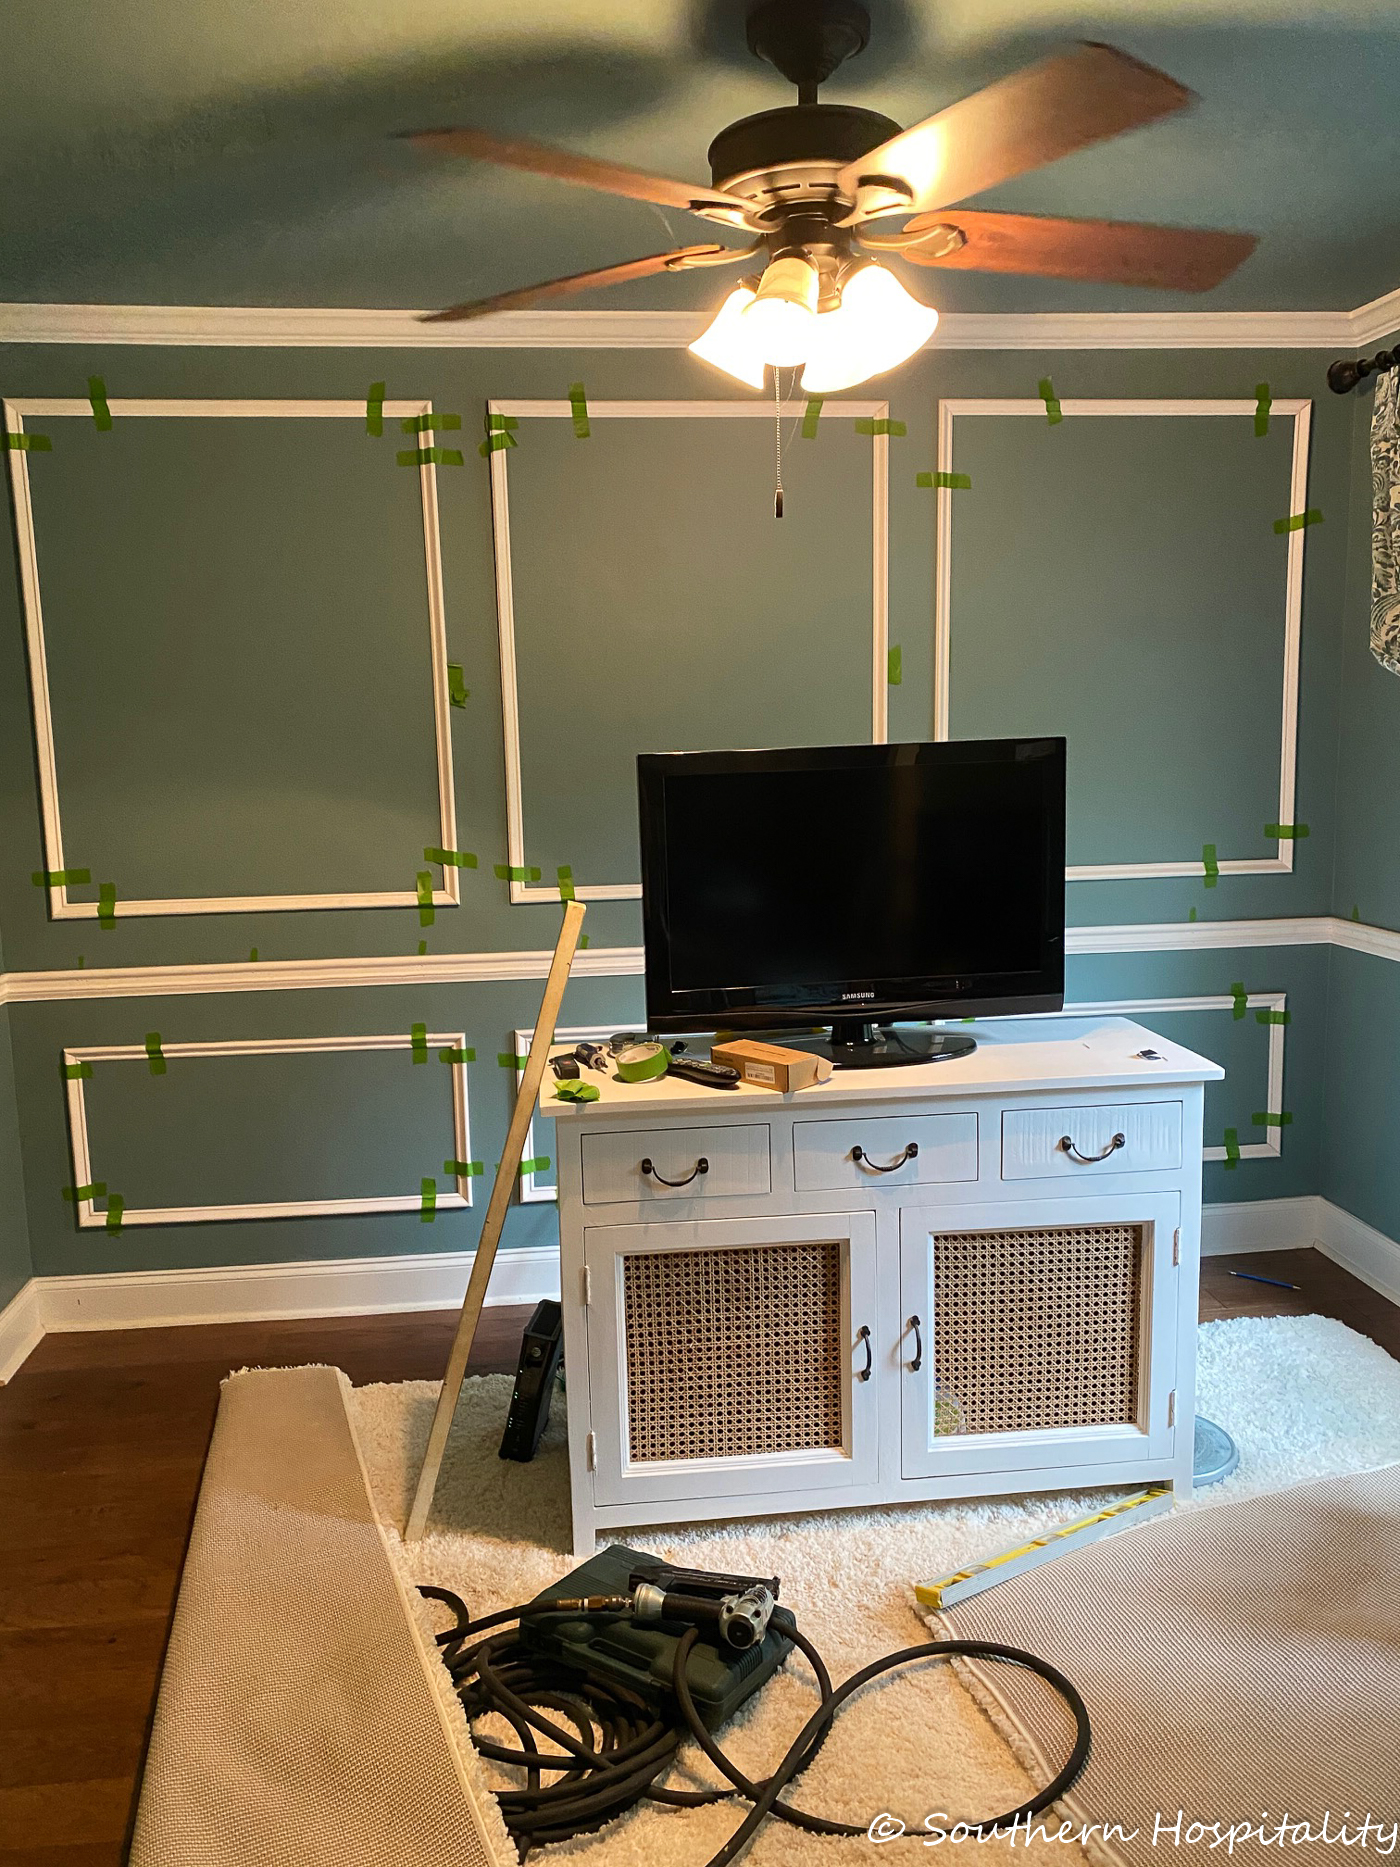 How to add picture frame molding to a room